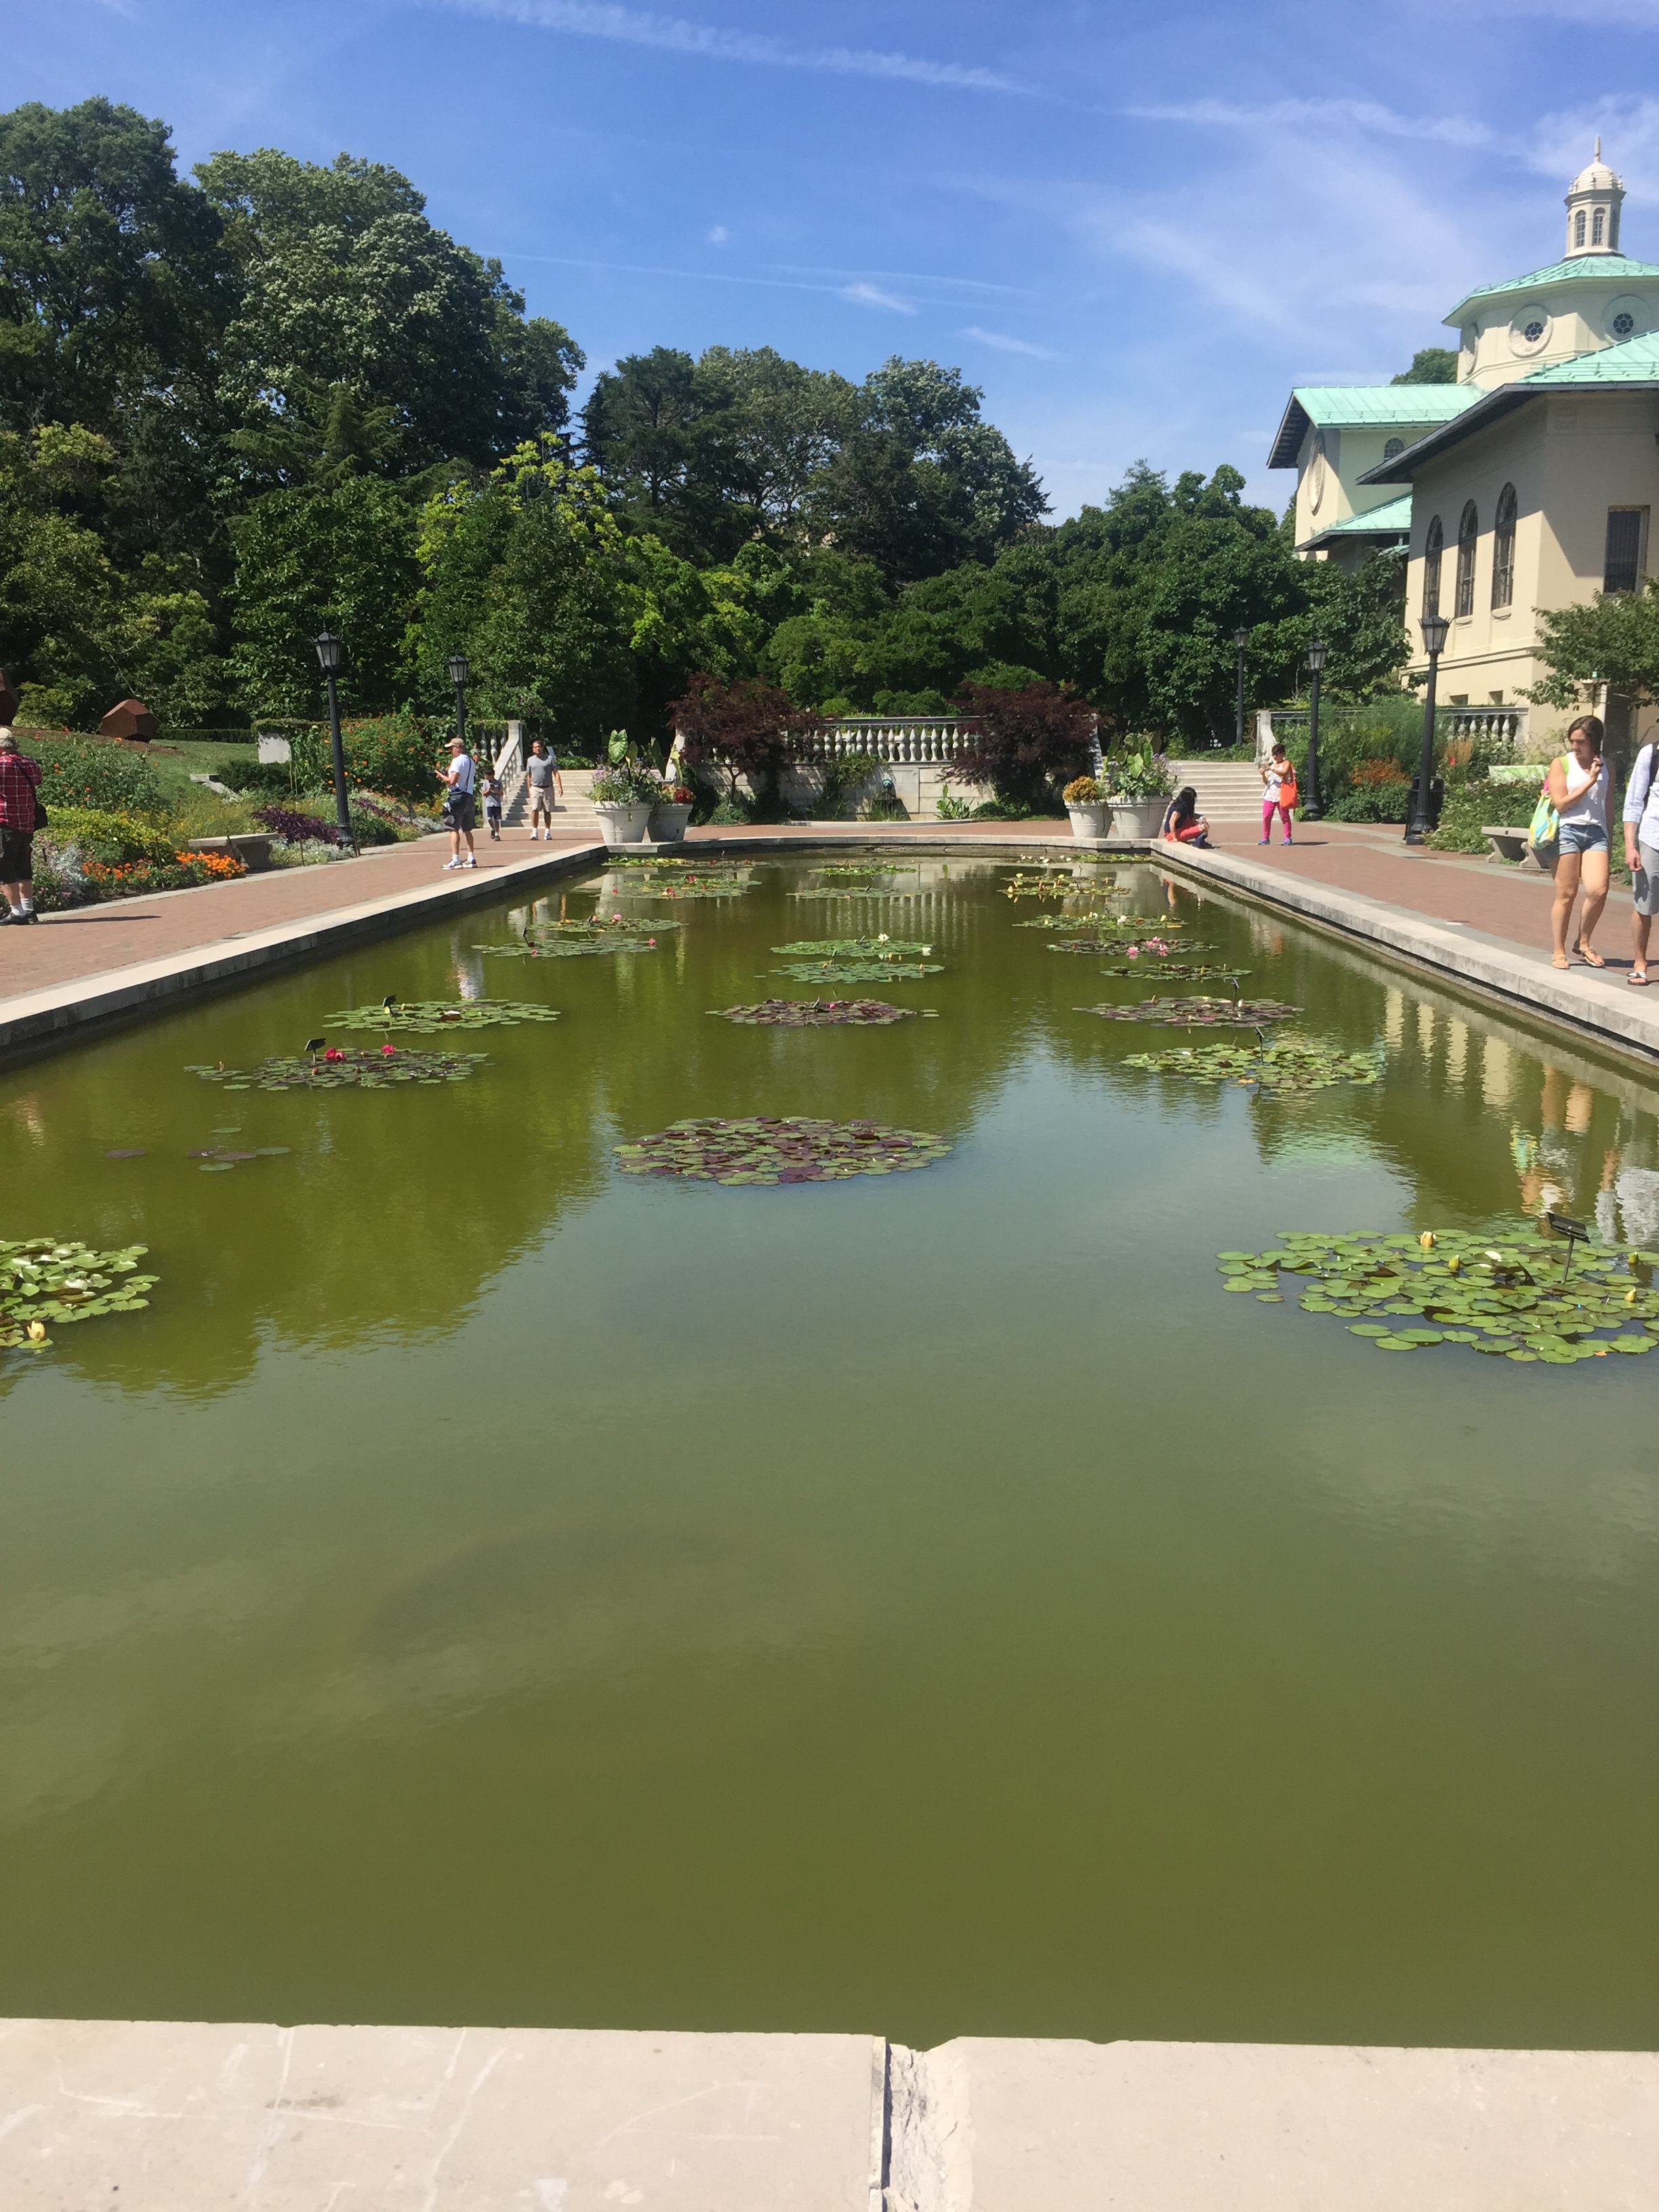 New York City isn't all concrete jungle. Check out the Brooklyn Botanic Gardens for a day of nature.